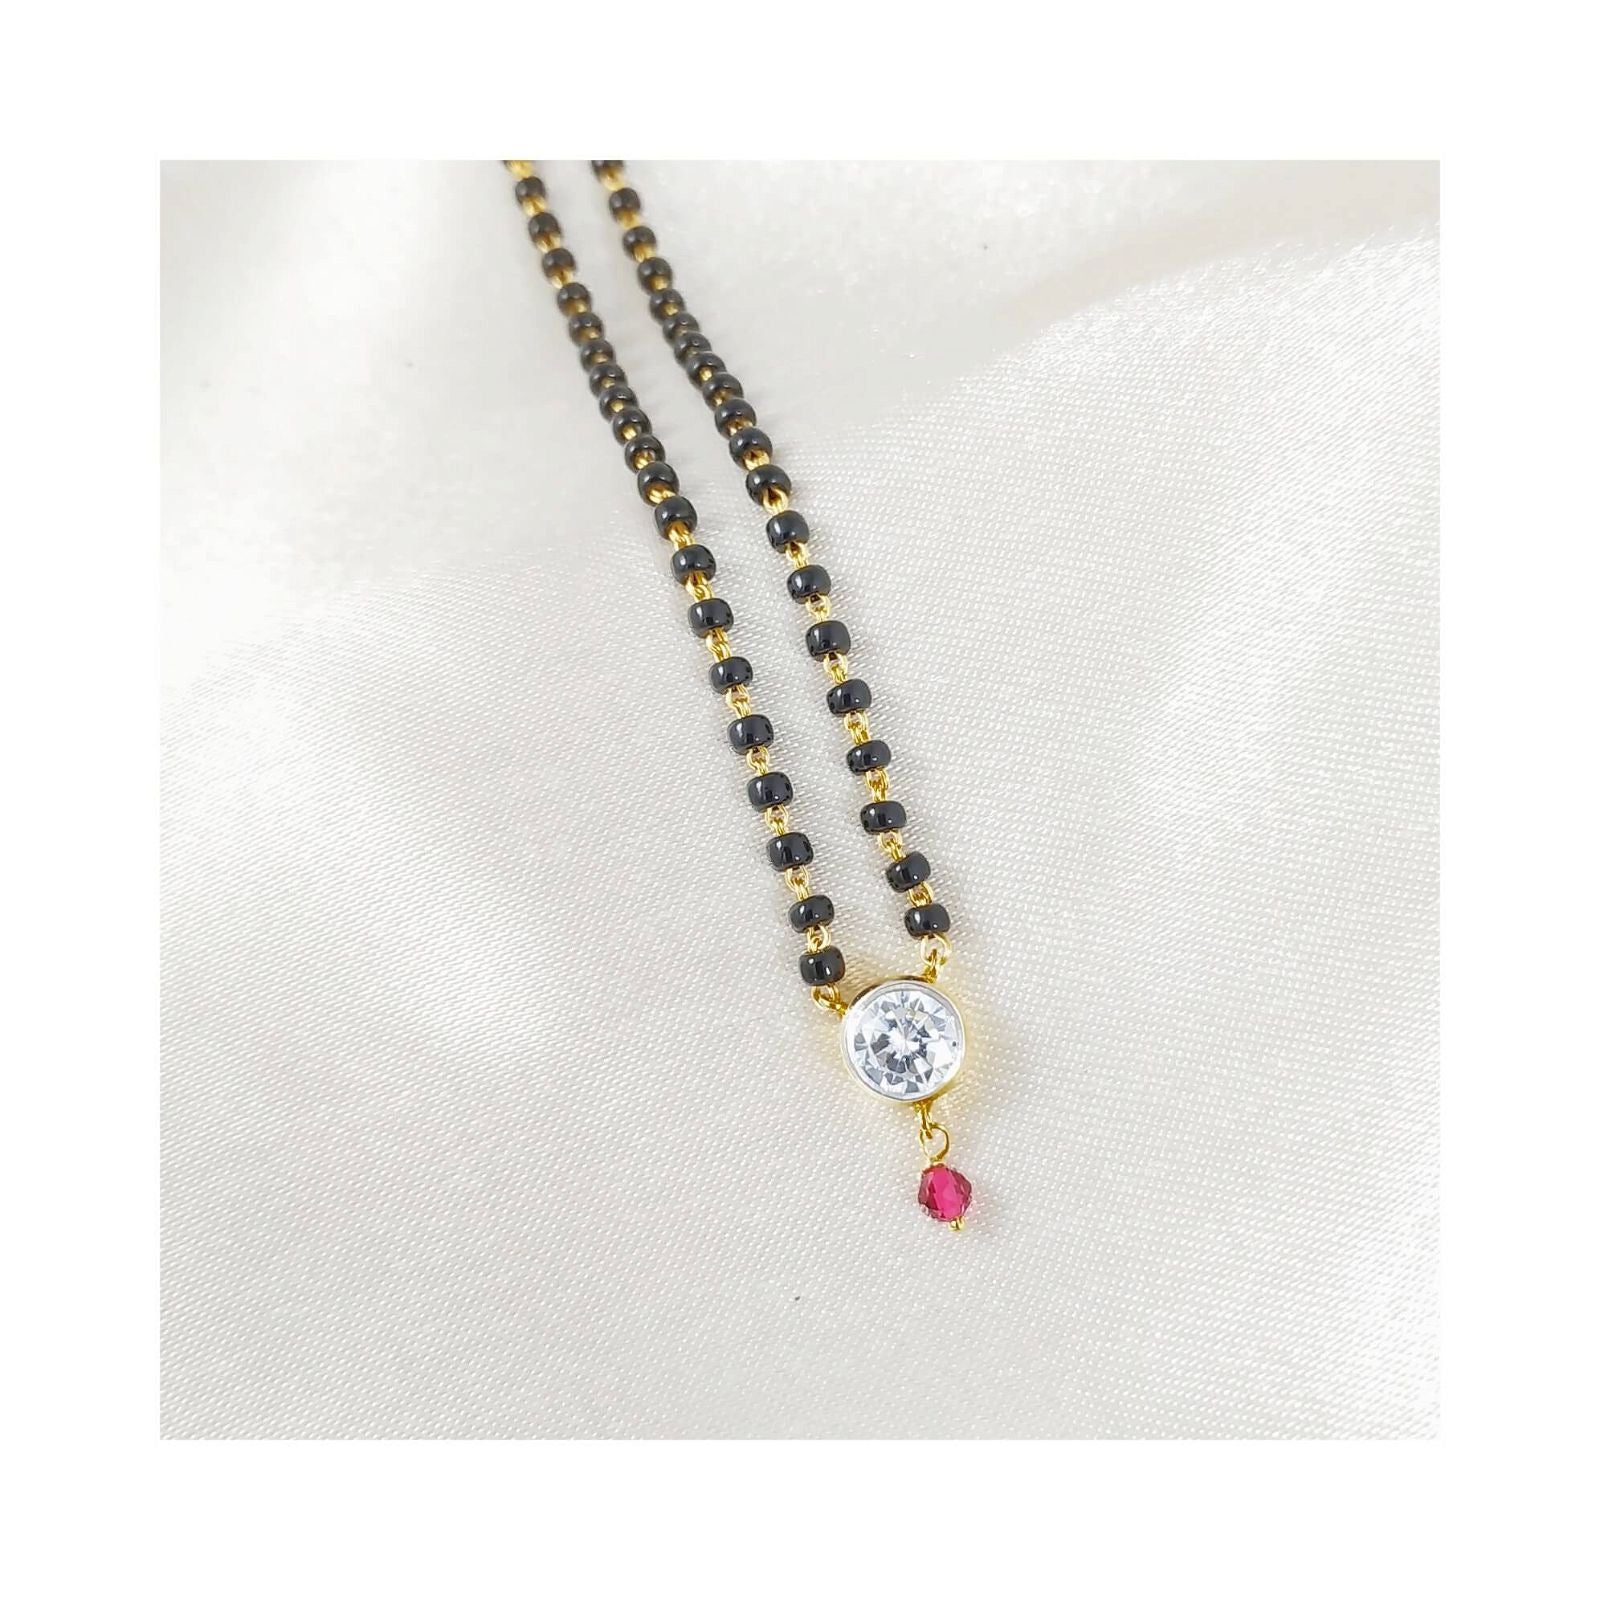 The Sparkling Hint of Home Neck Mangalsutra - RishiRich Jewels